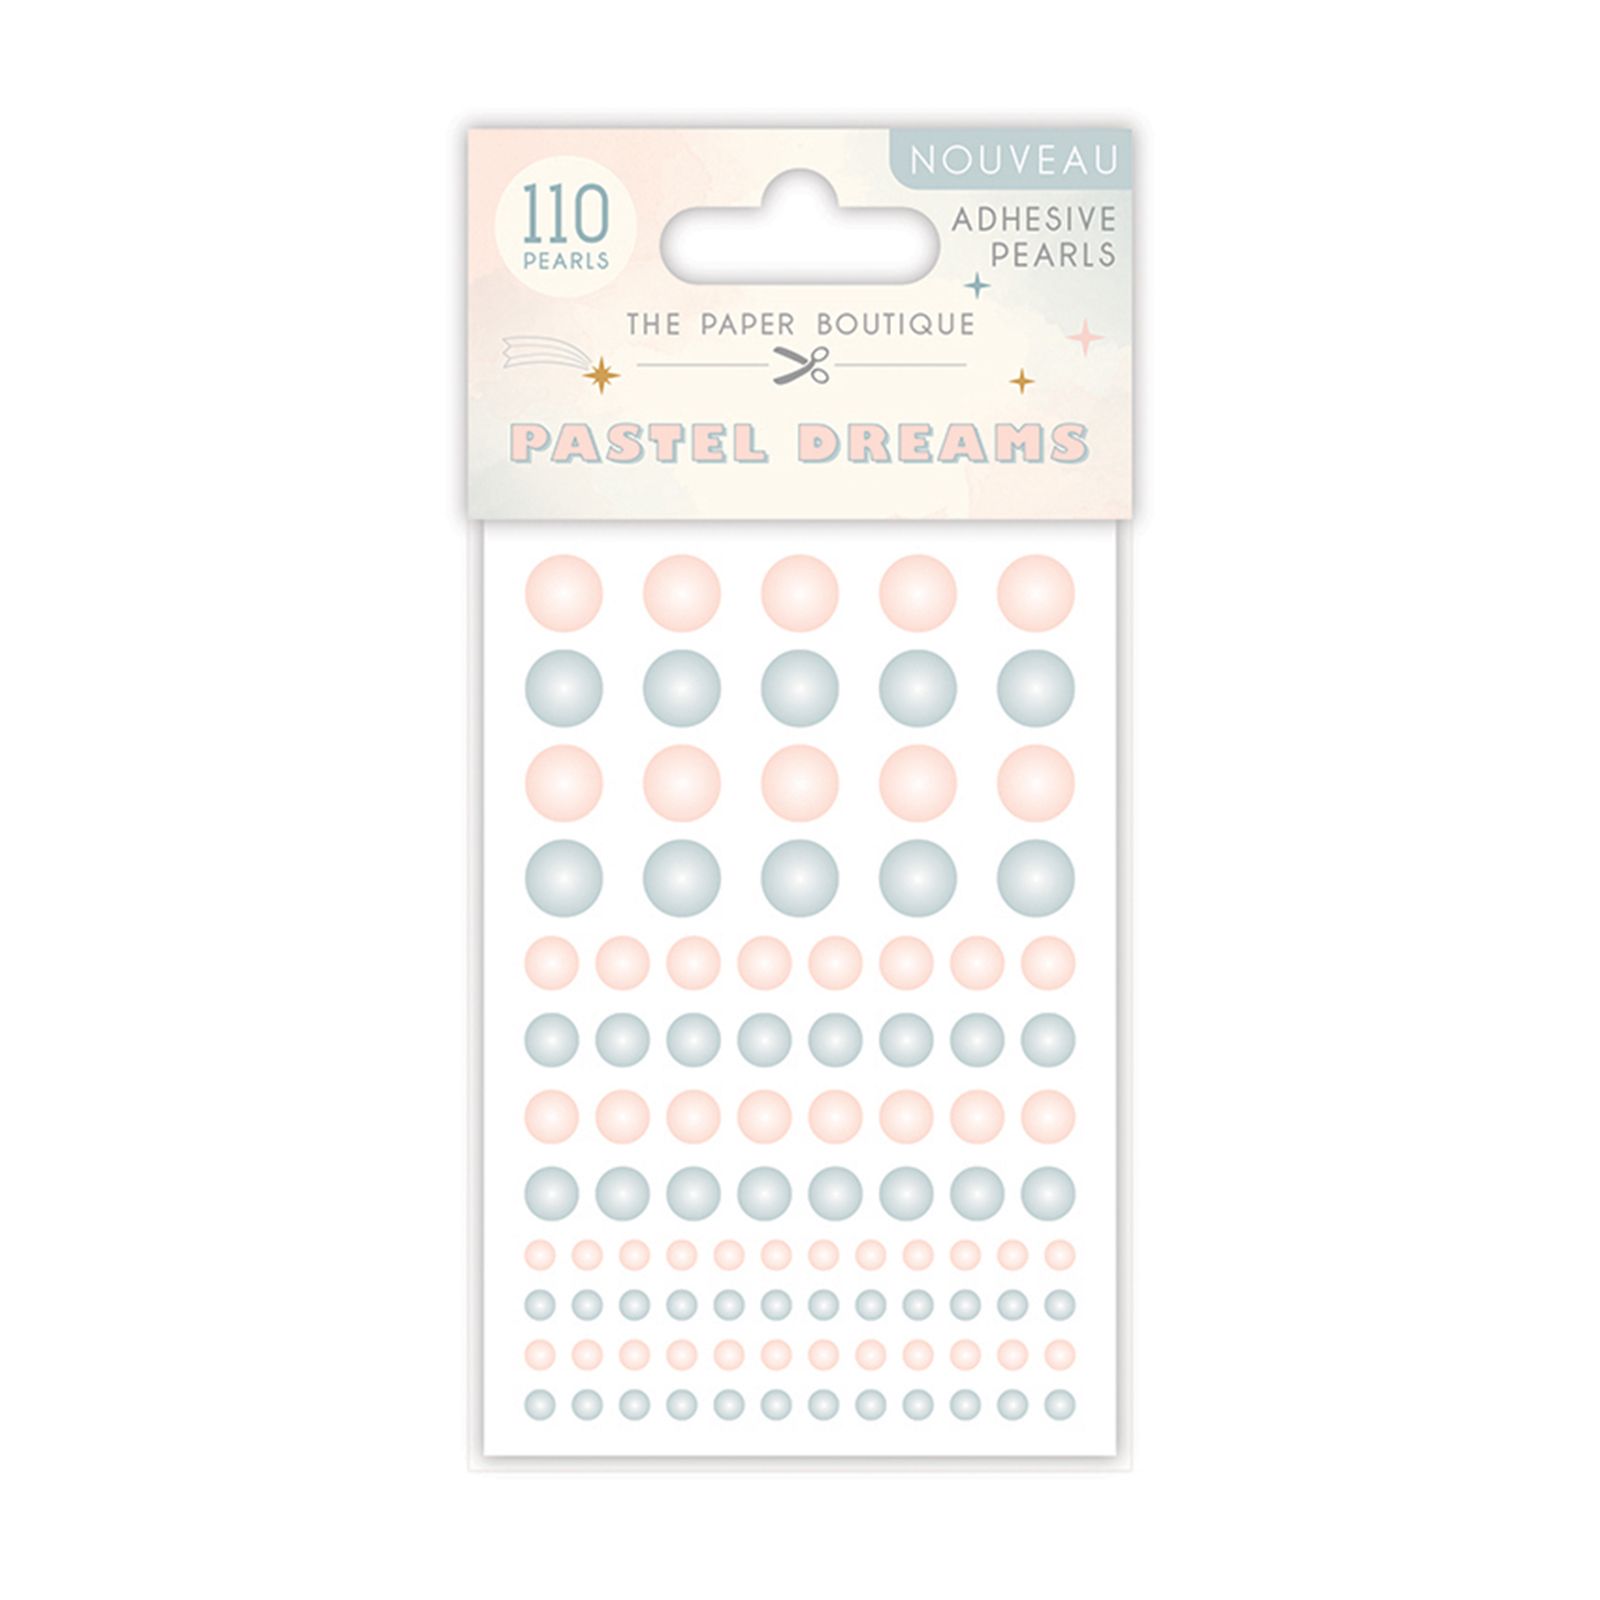 The Paper Boutique • Pastel dreams Adhesive pearls